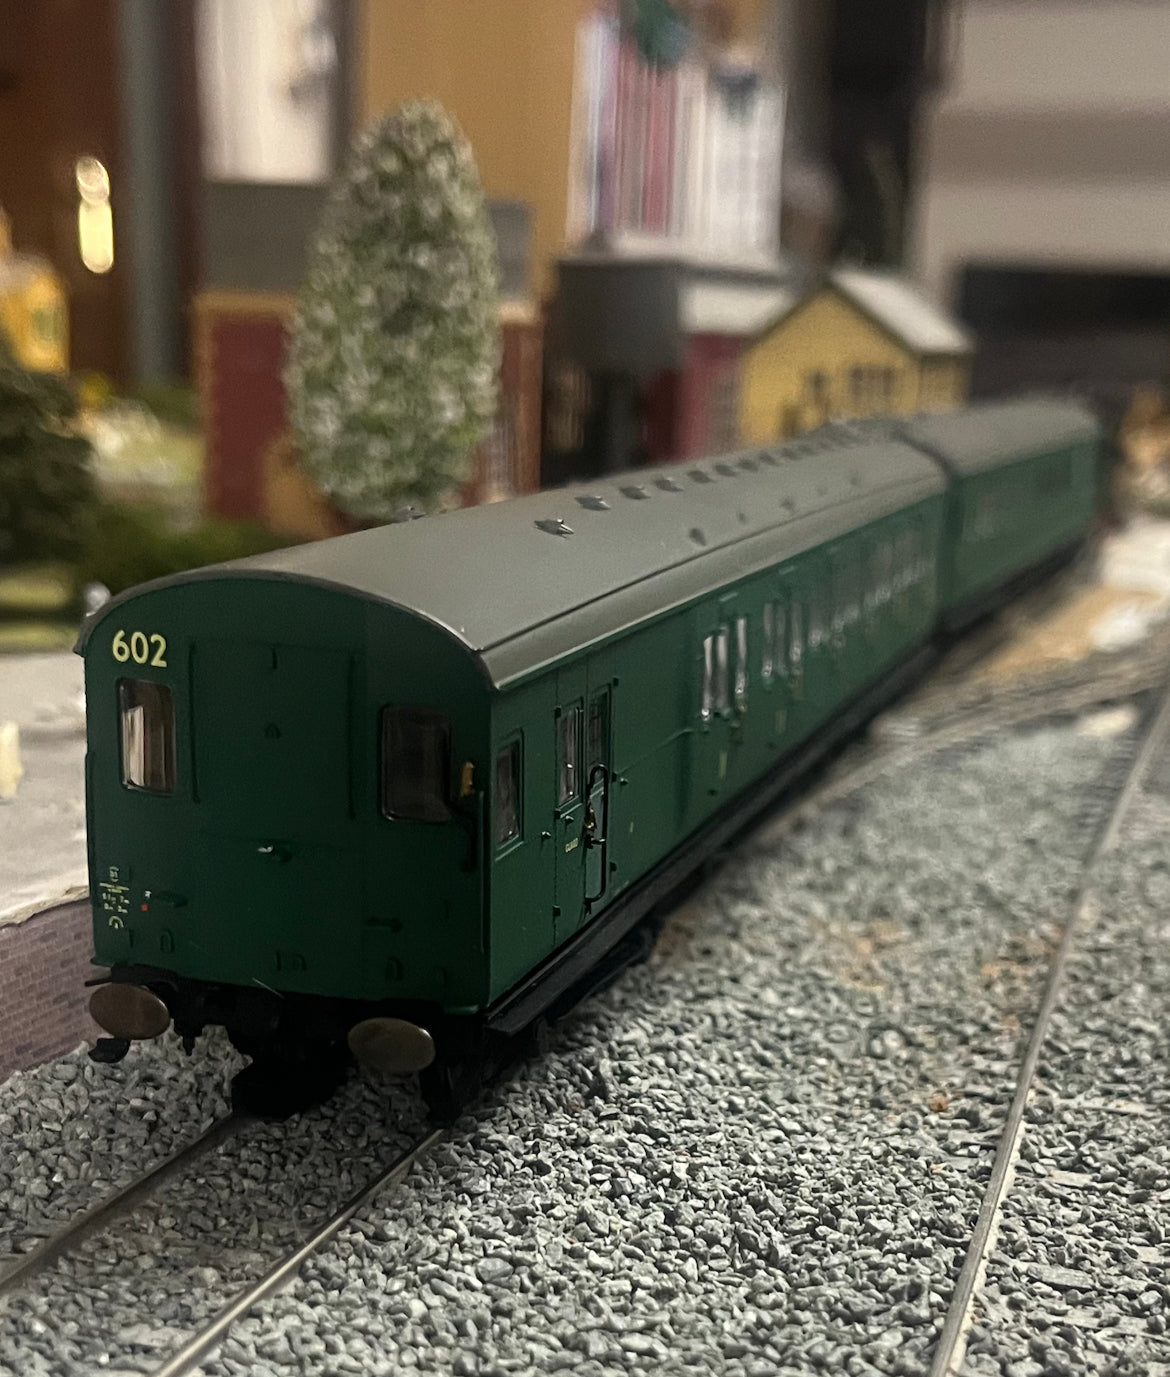 Hornby, British Railways H Class Pull-Push, special edition (309 of 1000). DCC Ready.